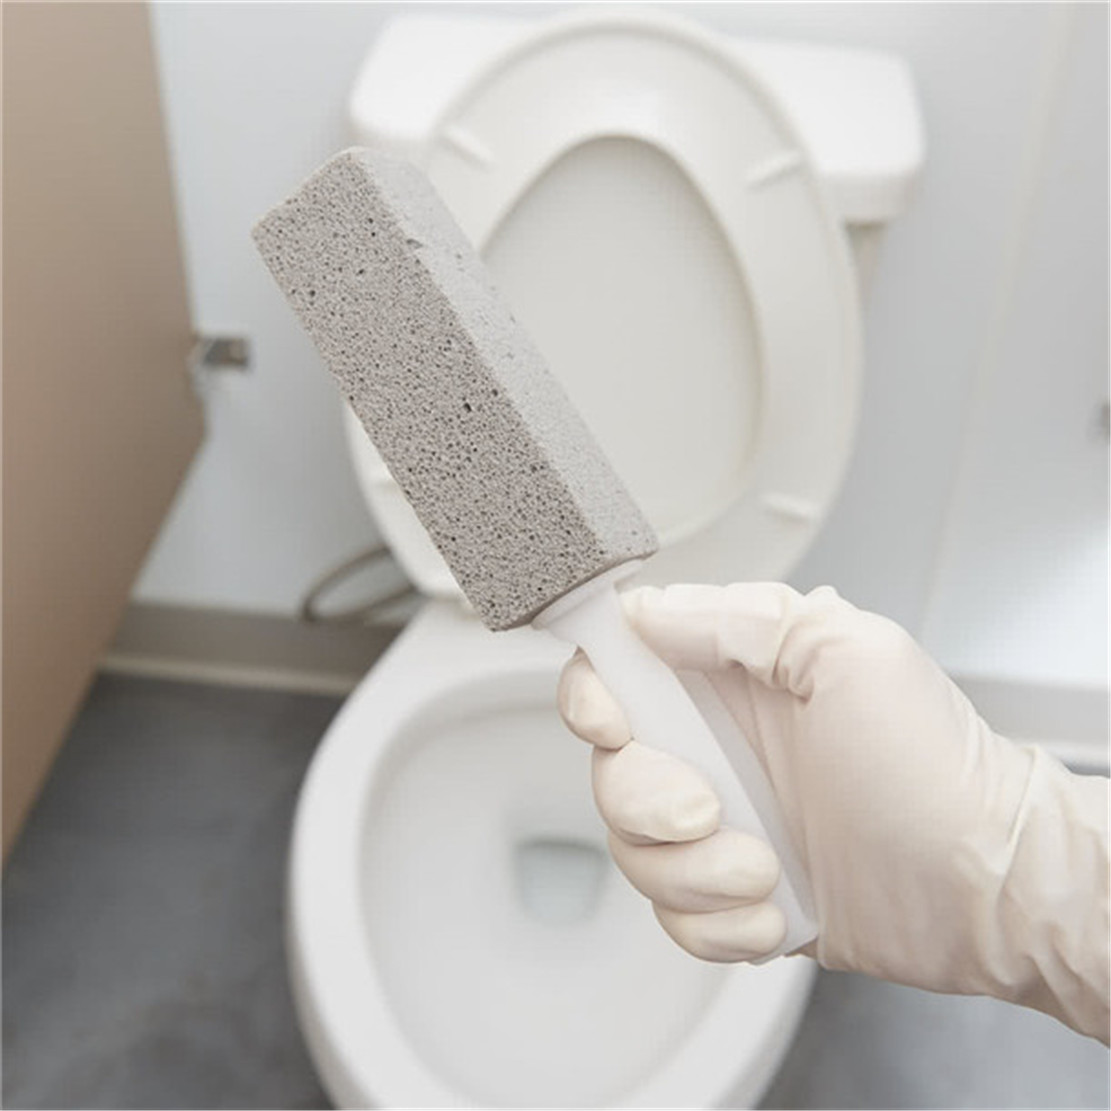 non-toxic household cleaner pumice stick